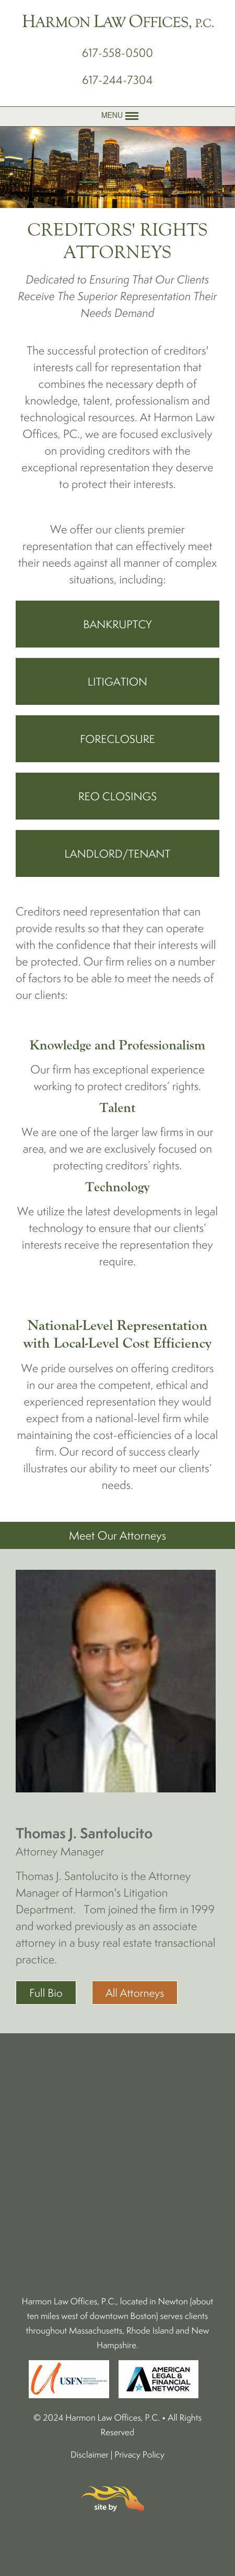 Harmon Law Offices, P.C. - Newton MA Lawyers